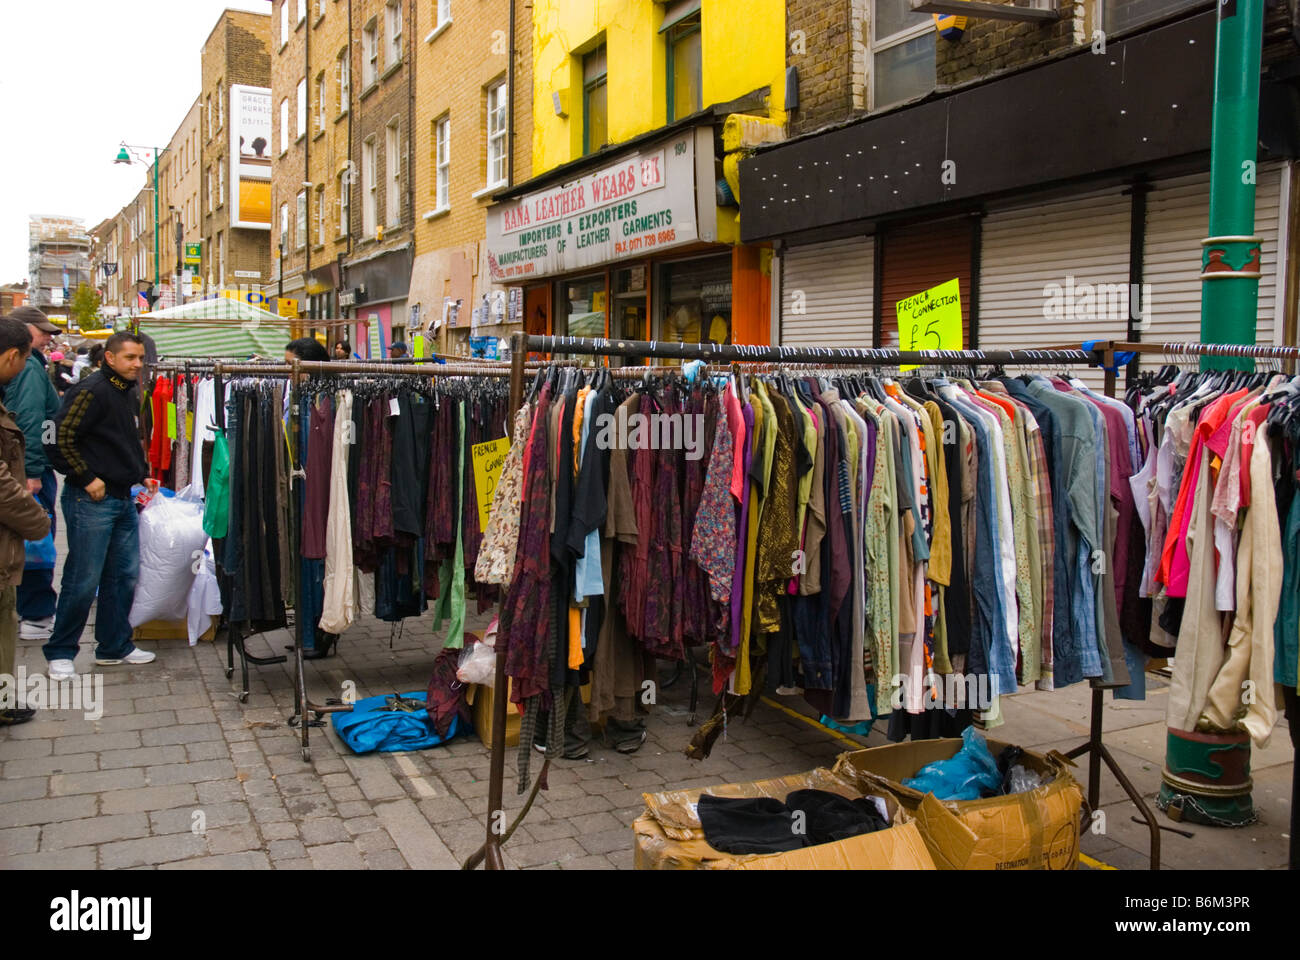 Cheap clothes for sale in Brick Lane on ...